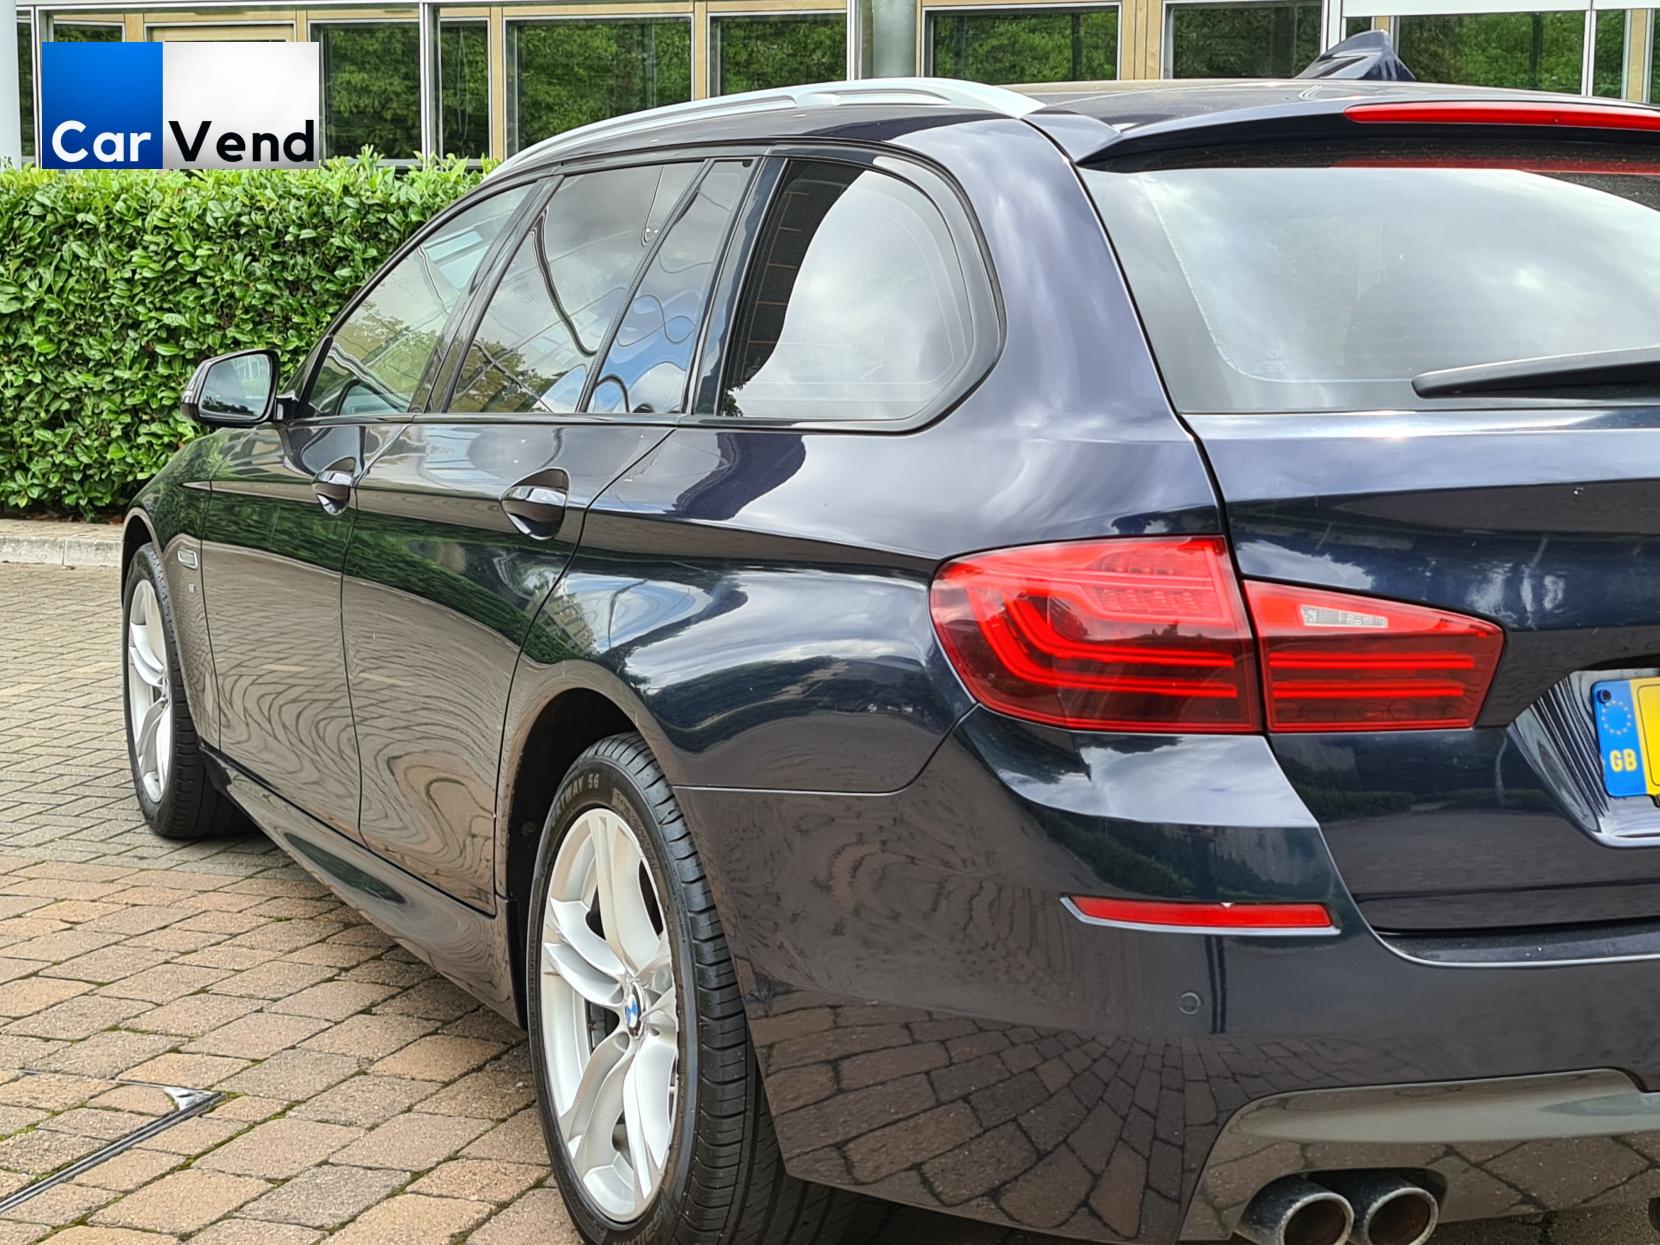 BMW 5 Series 2.0 520d M Sport Touring 5dr Diesel Manual Euro 6 (s/s) (184 ps)